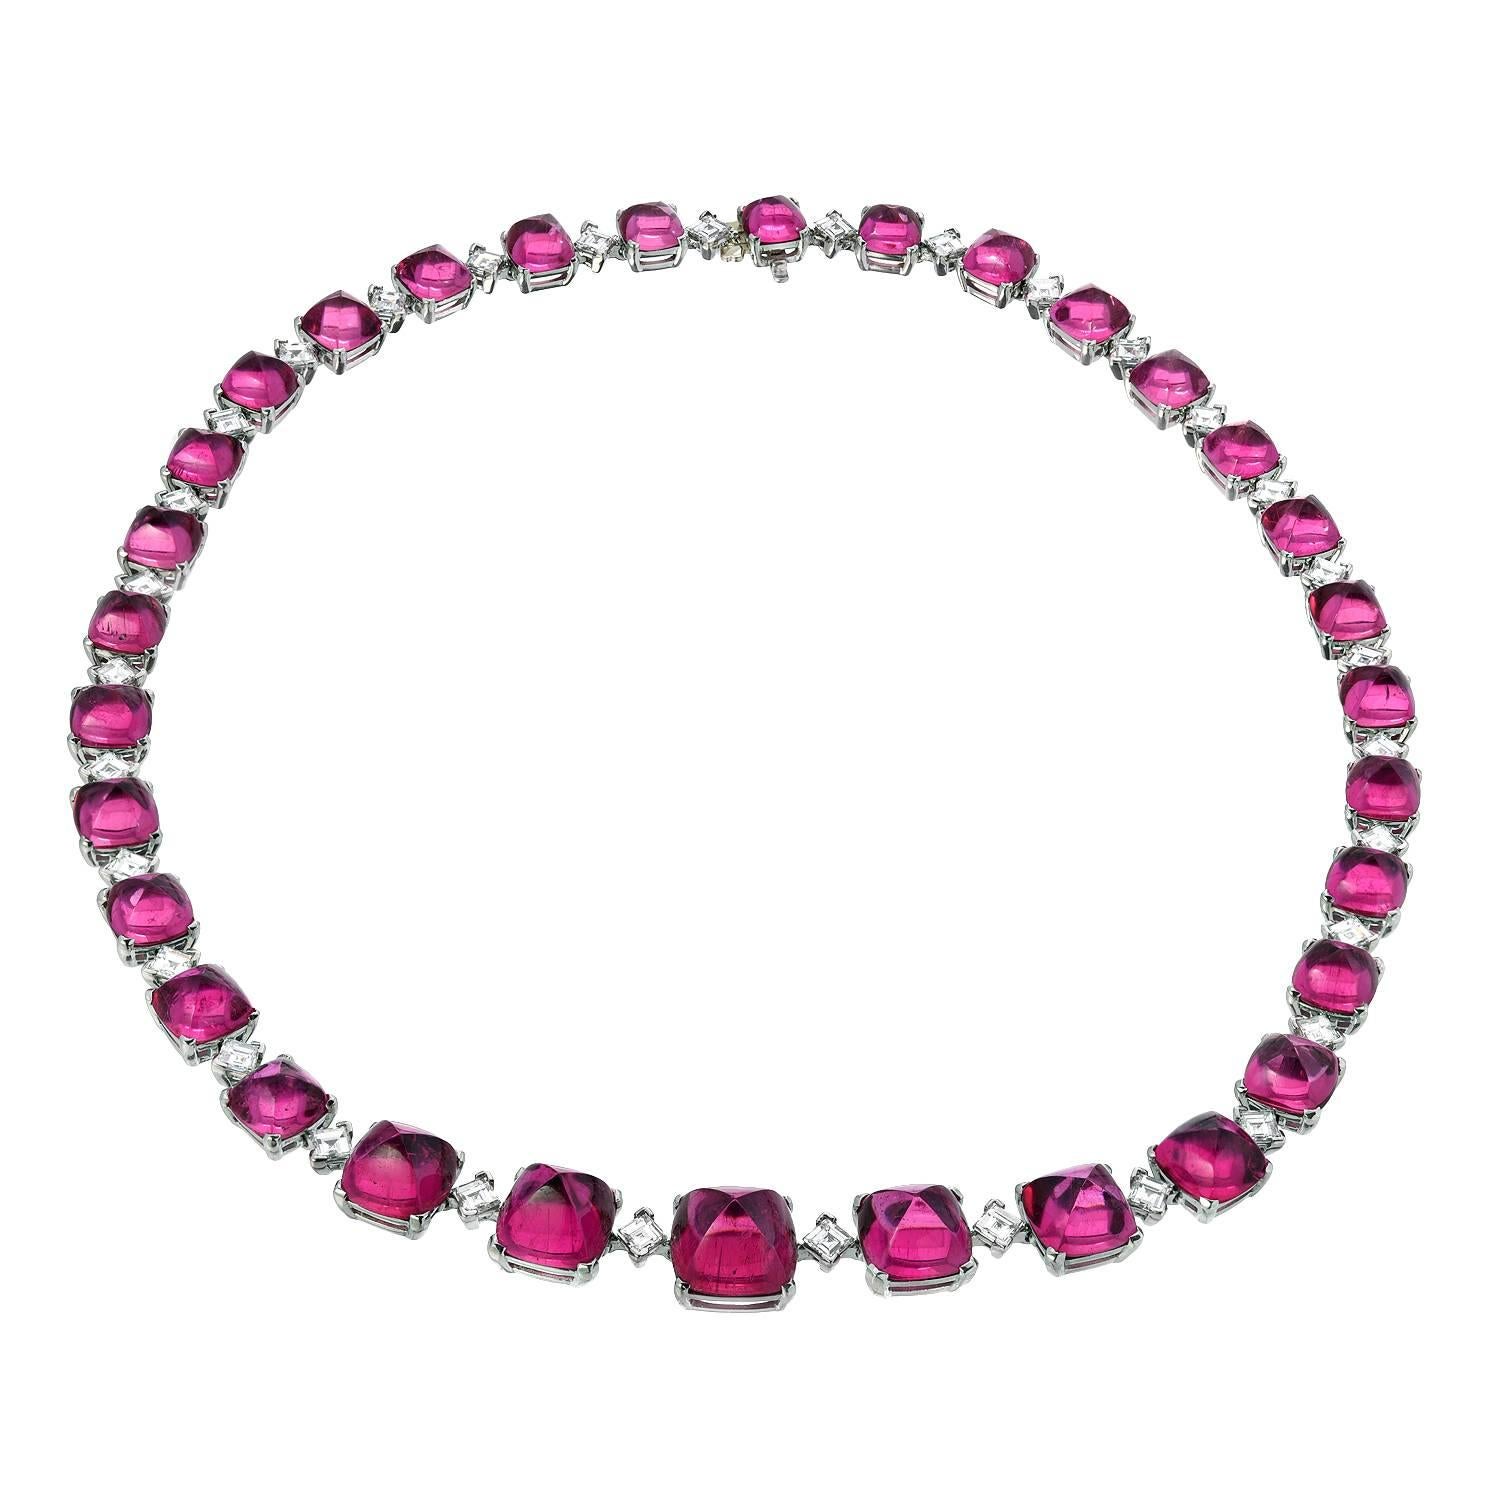 Superior 32 gradually custom-cut sugar loaf, cushion cut, cabochon Rubellite Tourmalines, weighing a total of 84.54 carats, are hand set in this one-of-a-kind 8.42 carat total diamond, platinum necklace.
Total length is 17 inches.
Returns are